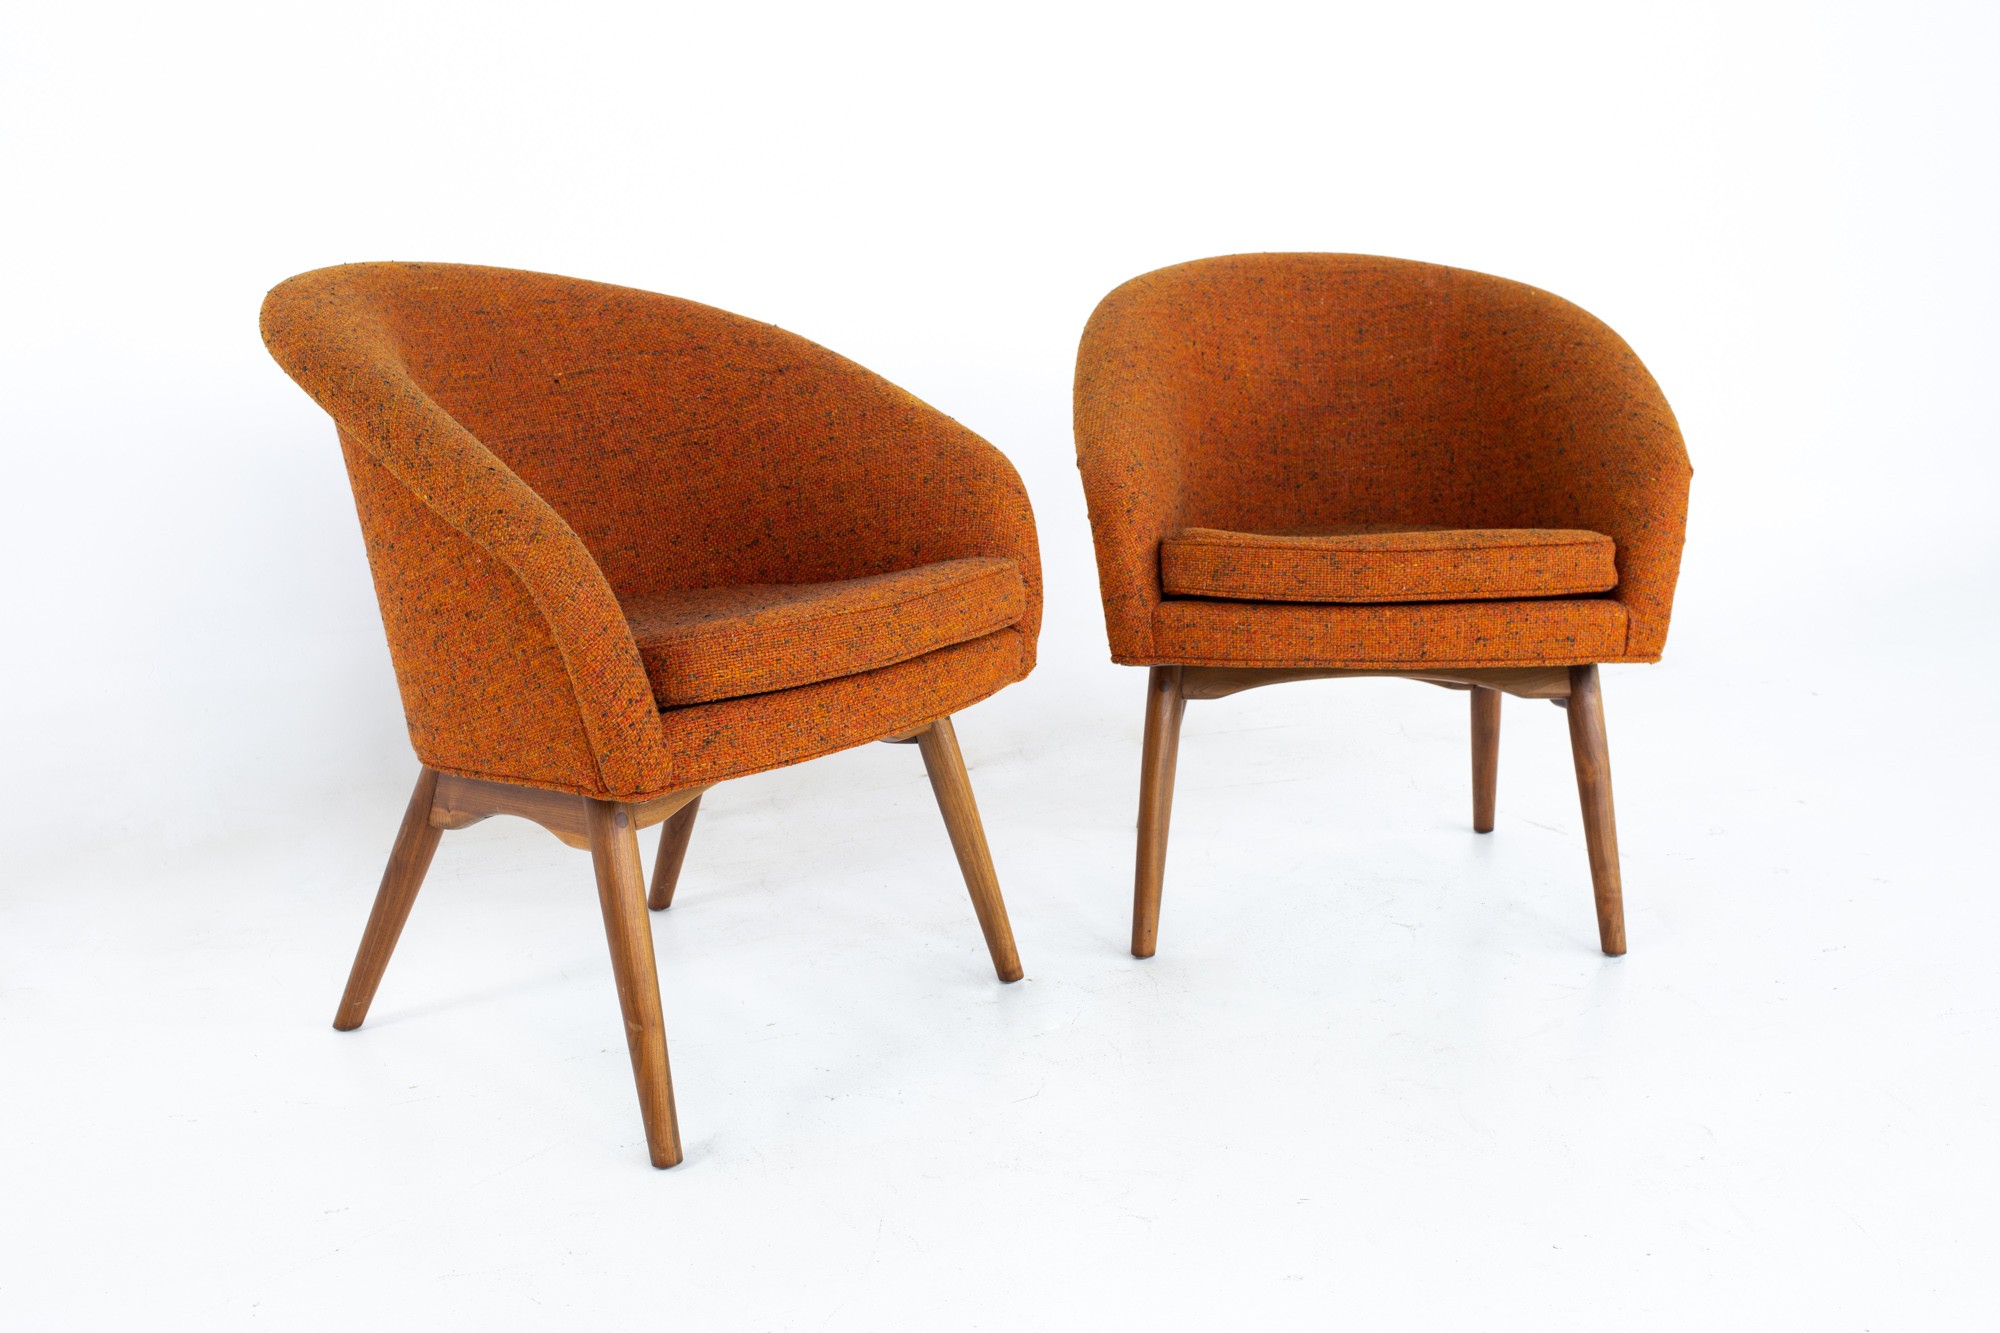 Milo Baughman for Thayer Coggin Mid Century Orange Upholstered Lounge Chairs - a Pair